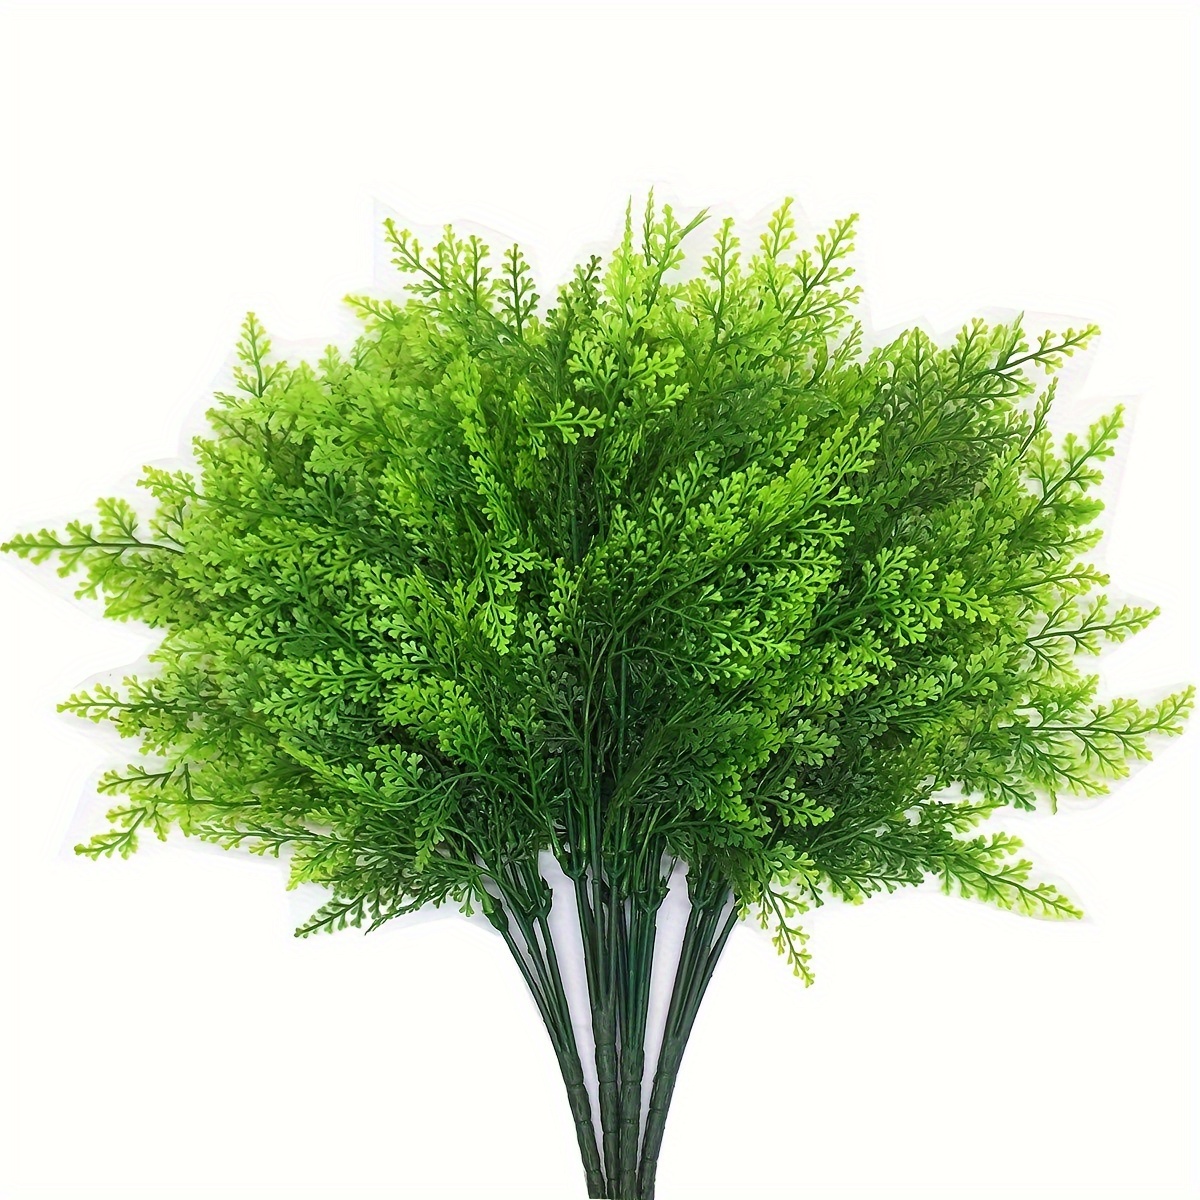 

4pcs, 13.8inch/ 35cm Plastic Artificial Greenery Plants - Fern Leaves For Indoor And Outdoor Use - Perfect For Weddings, Home Decor, And Christmas Decorations